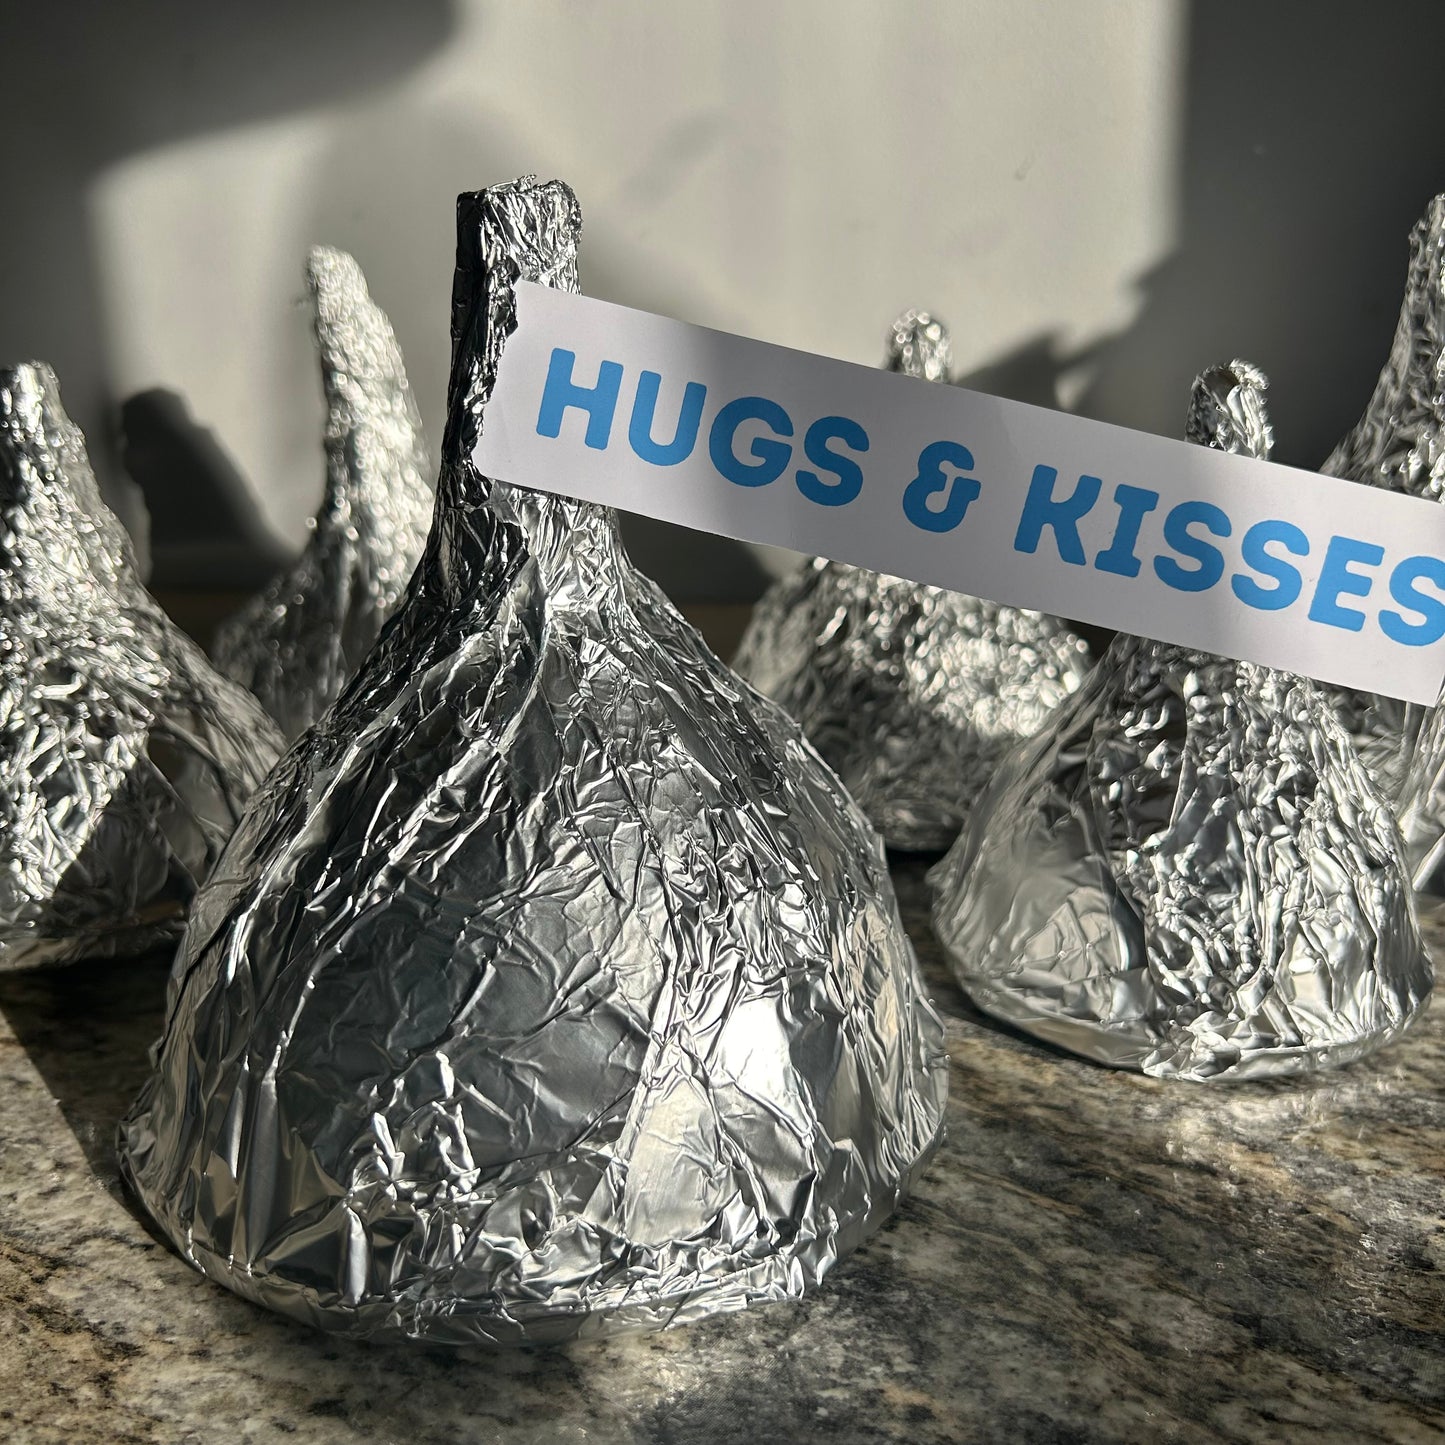 NO CANDY! These are my Valentine's Day Smash Open Hugs & Kisses with 4-6 surprises in each!!!